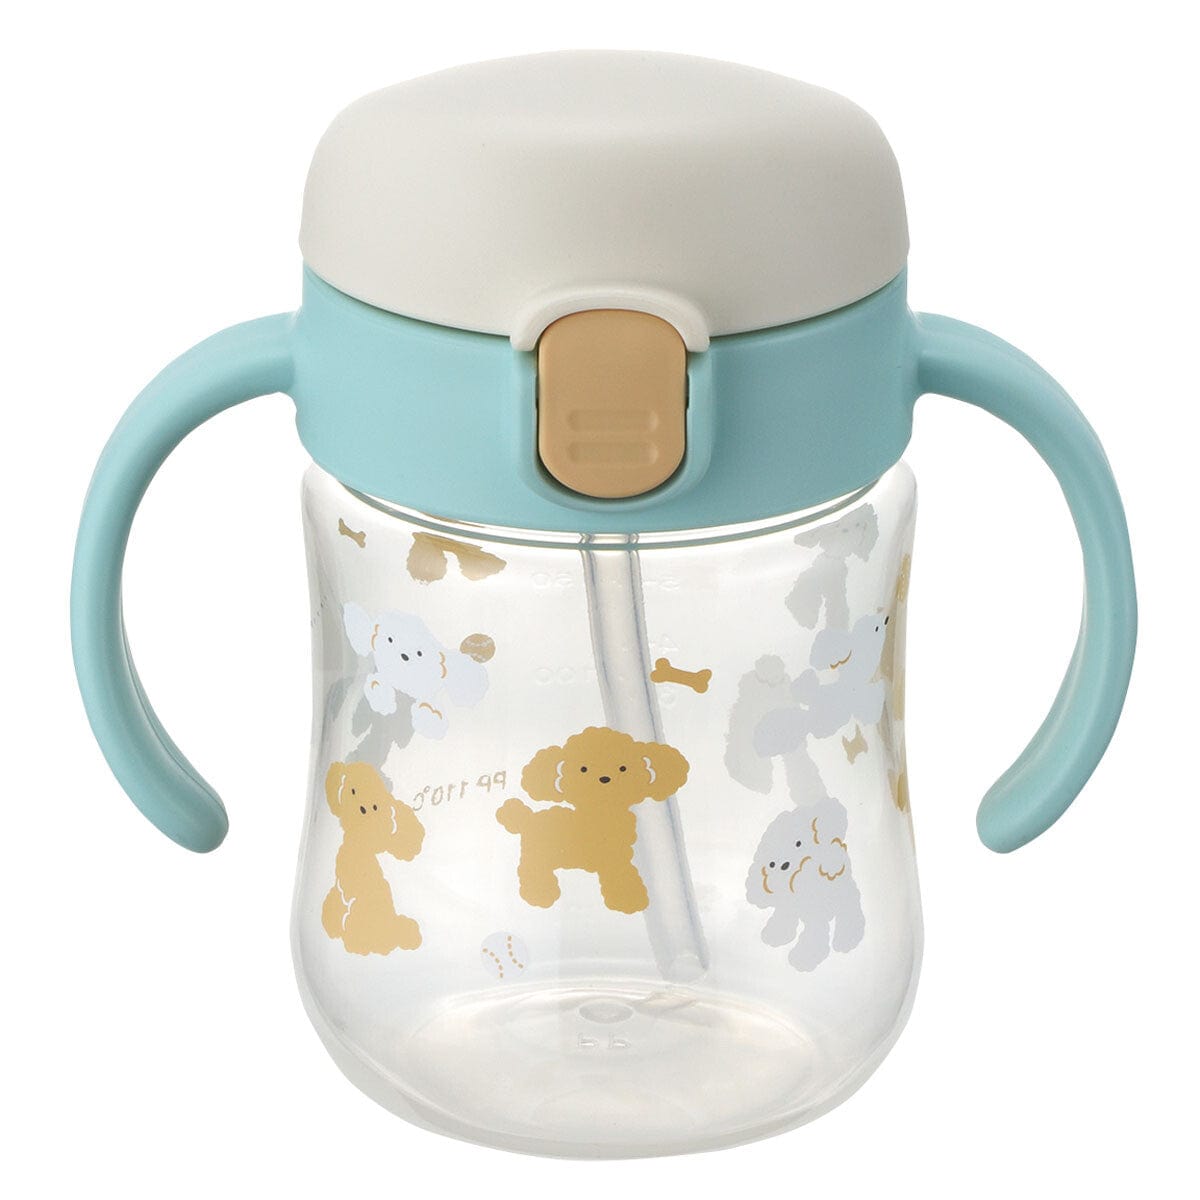 Richell - T.L.I Baby Stage 1 Try Sippy Spout Clear Training Water Bottle Mug - Light Blue Baby Water Bottle 4945680203500 Durio.sg